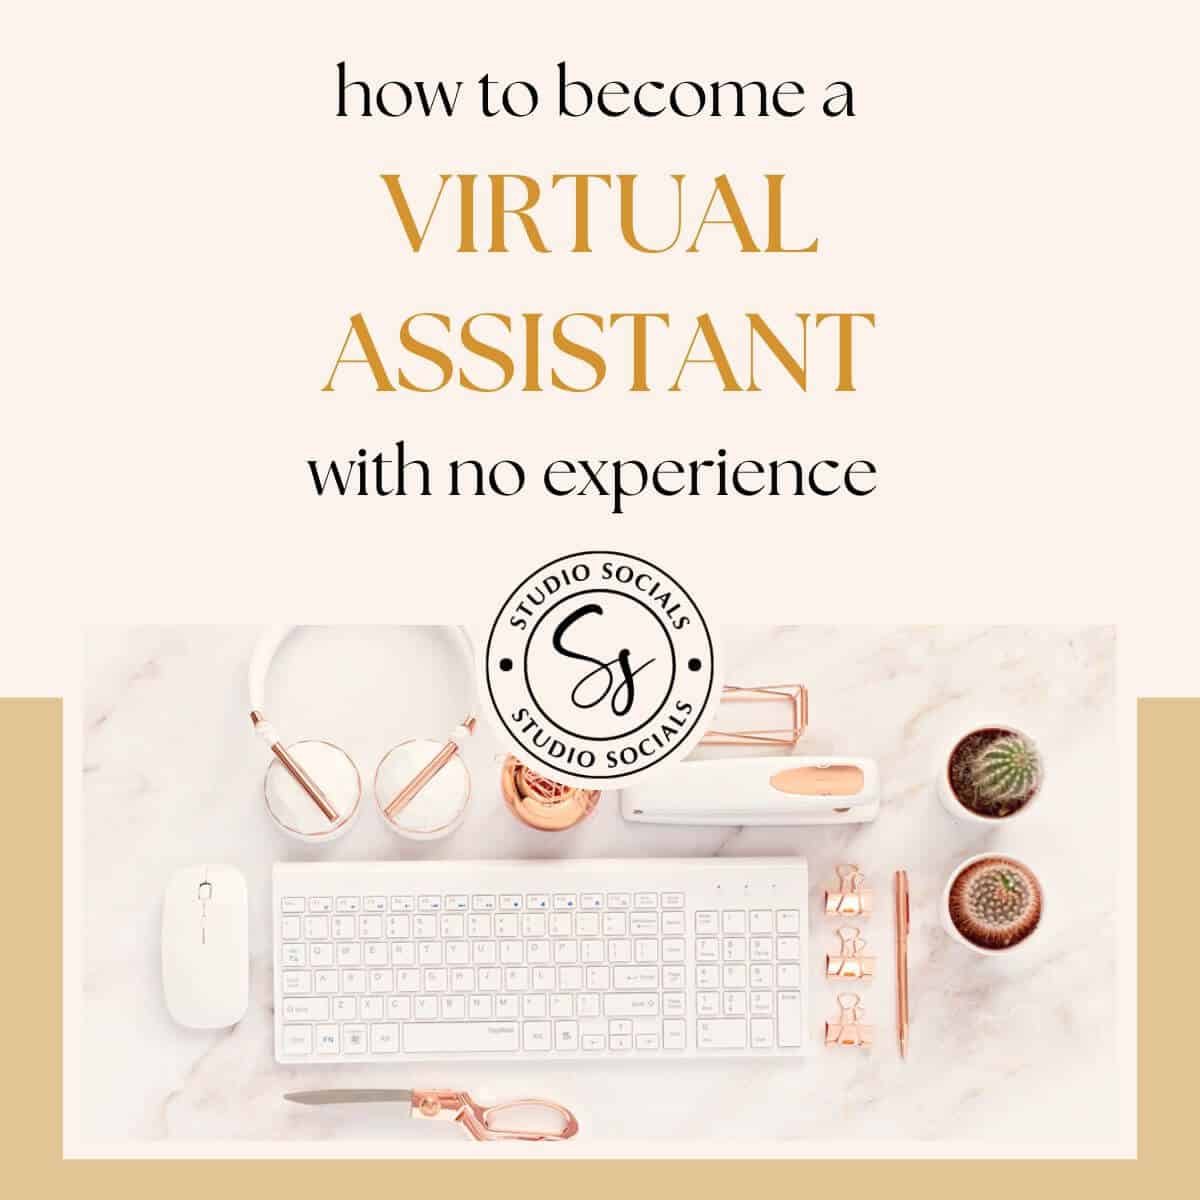 how to become a virtual assistant with no experience